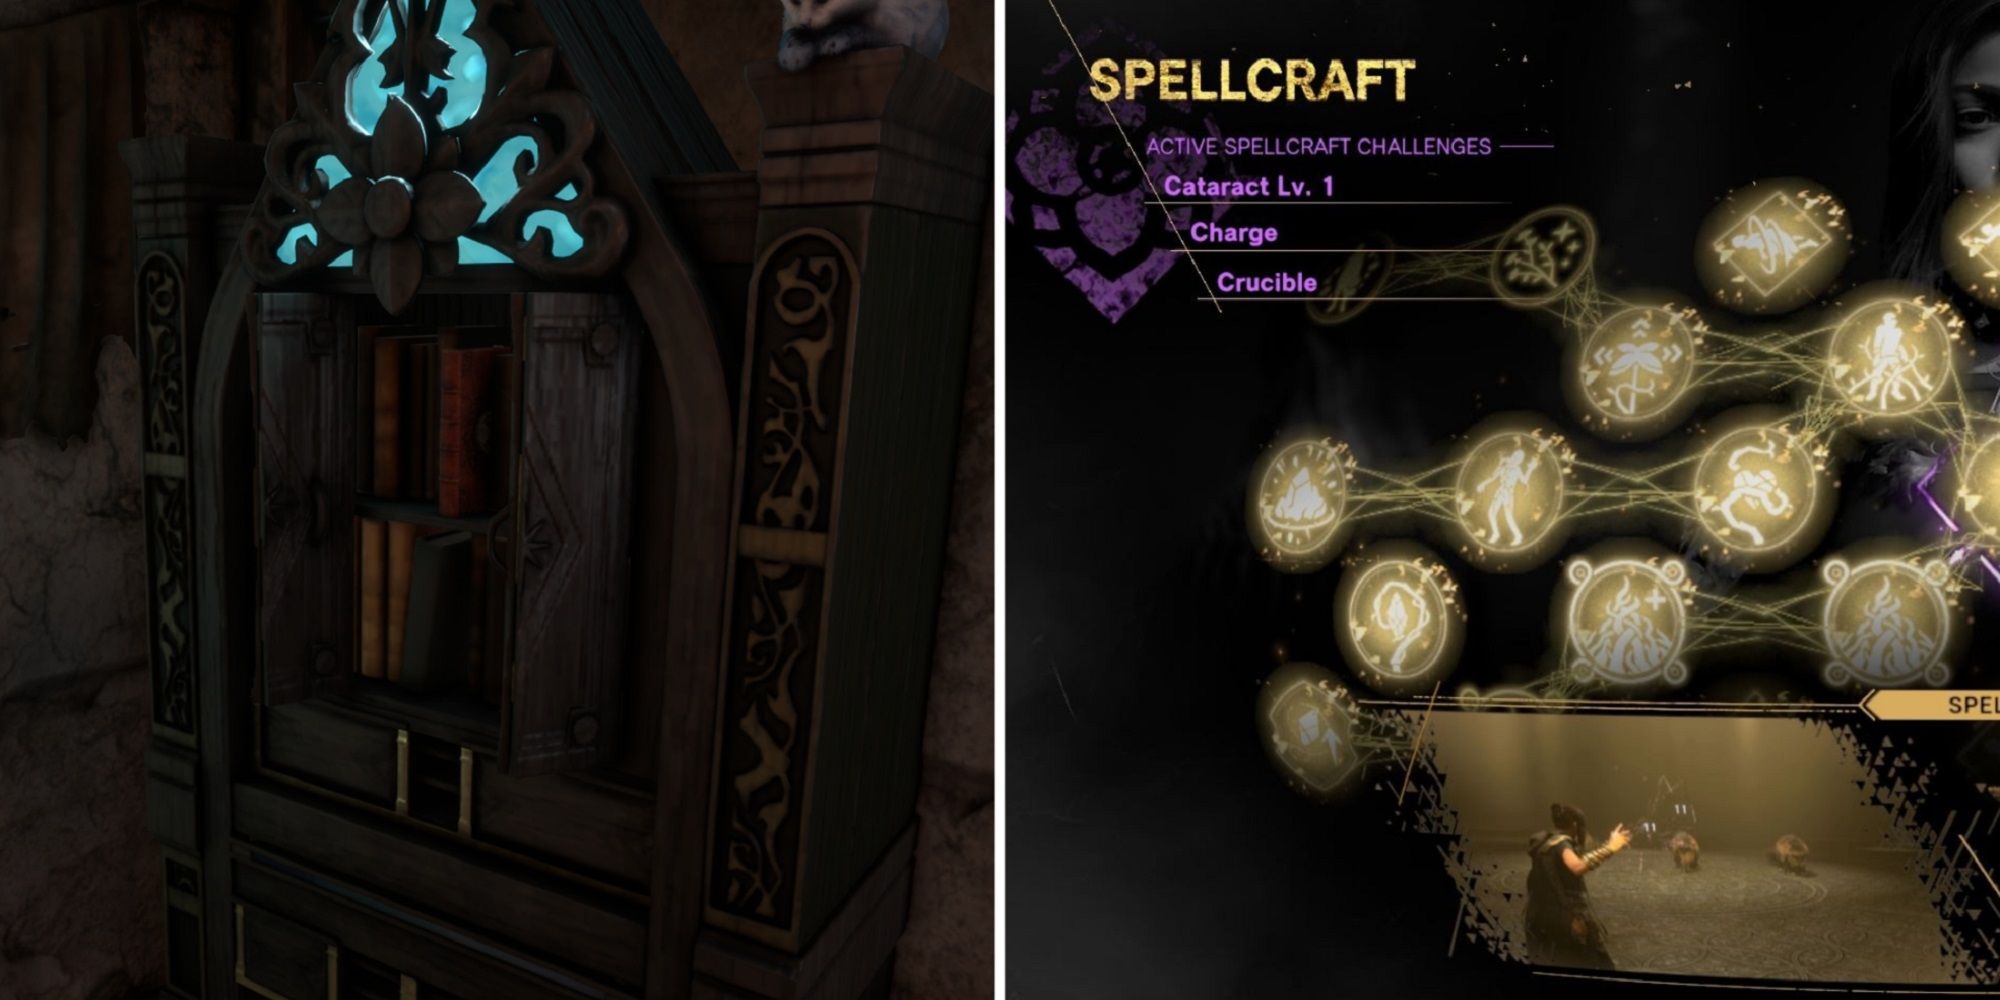 Bookcase In A Refuge And Spellcraft Challenges Show In Upper Left Of Screen In The Bookcase Menu